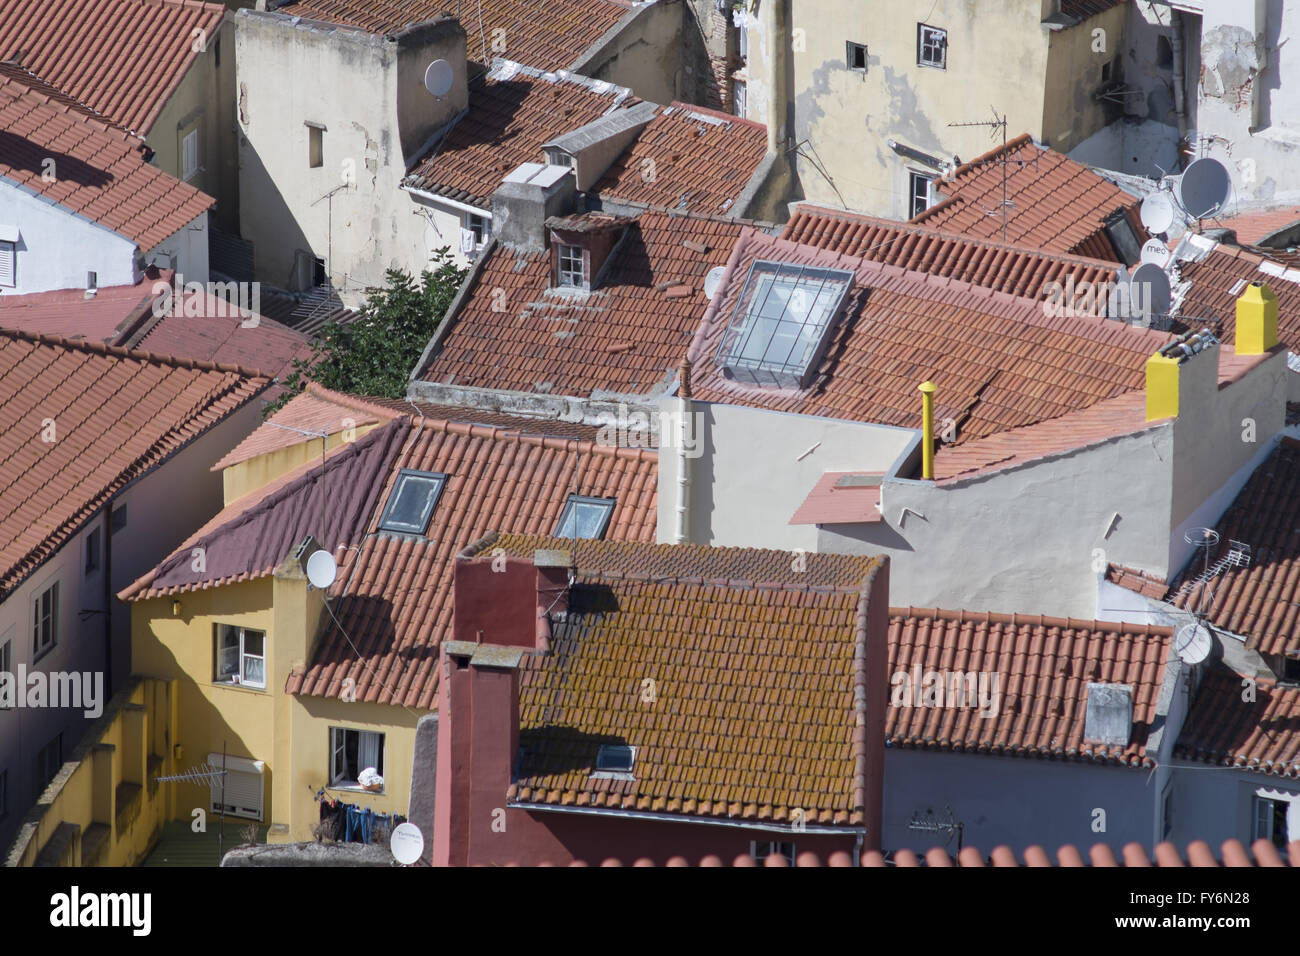 Tiled roofs seen from above Stock Photo